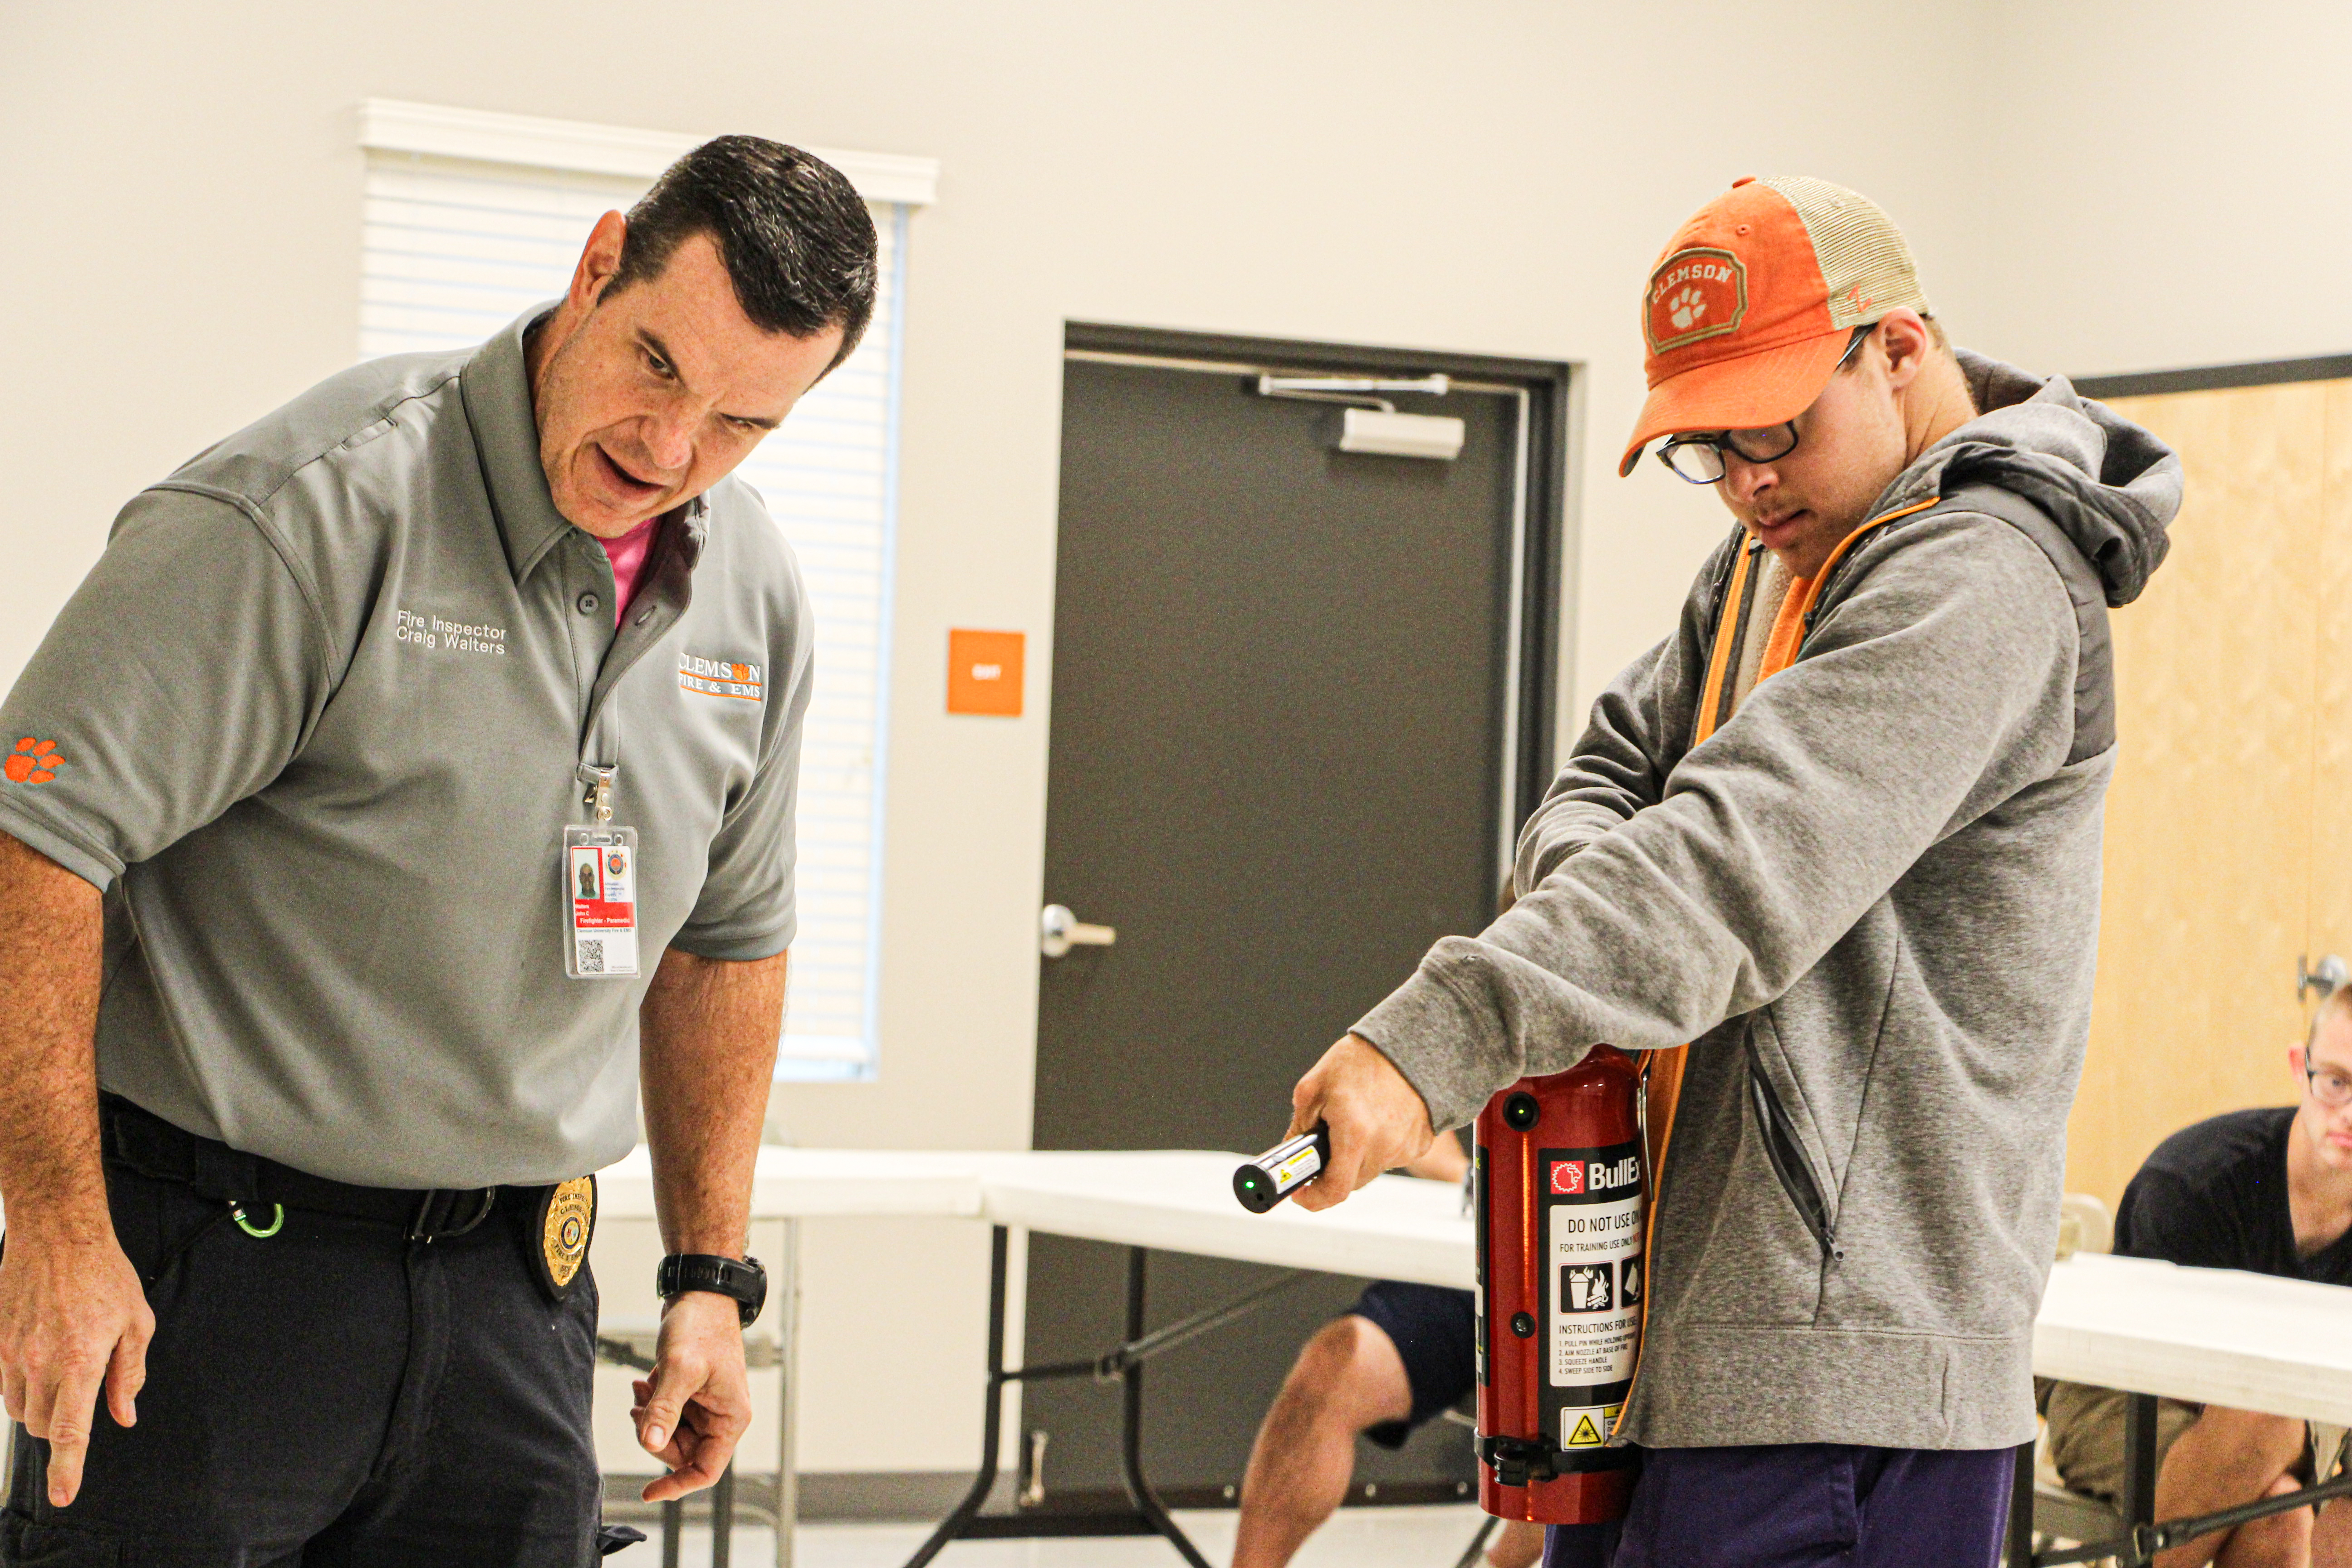 A Clemson student learns how to use a fire extinguisher from an instructor.